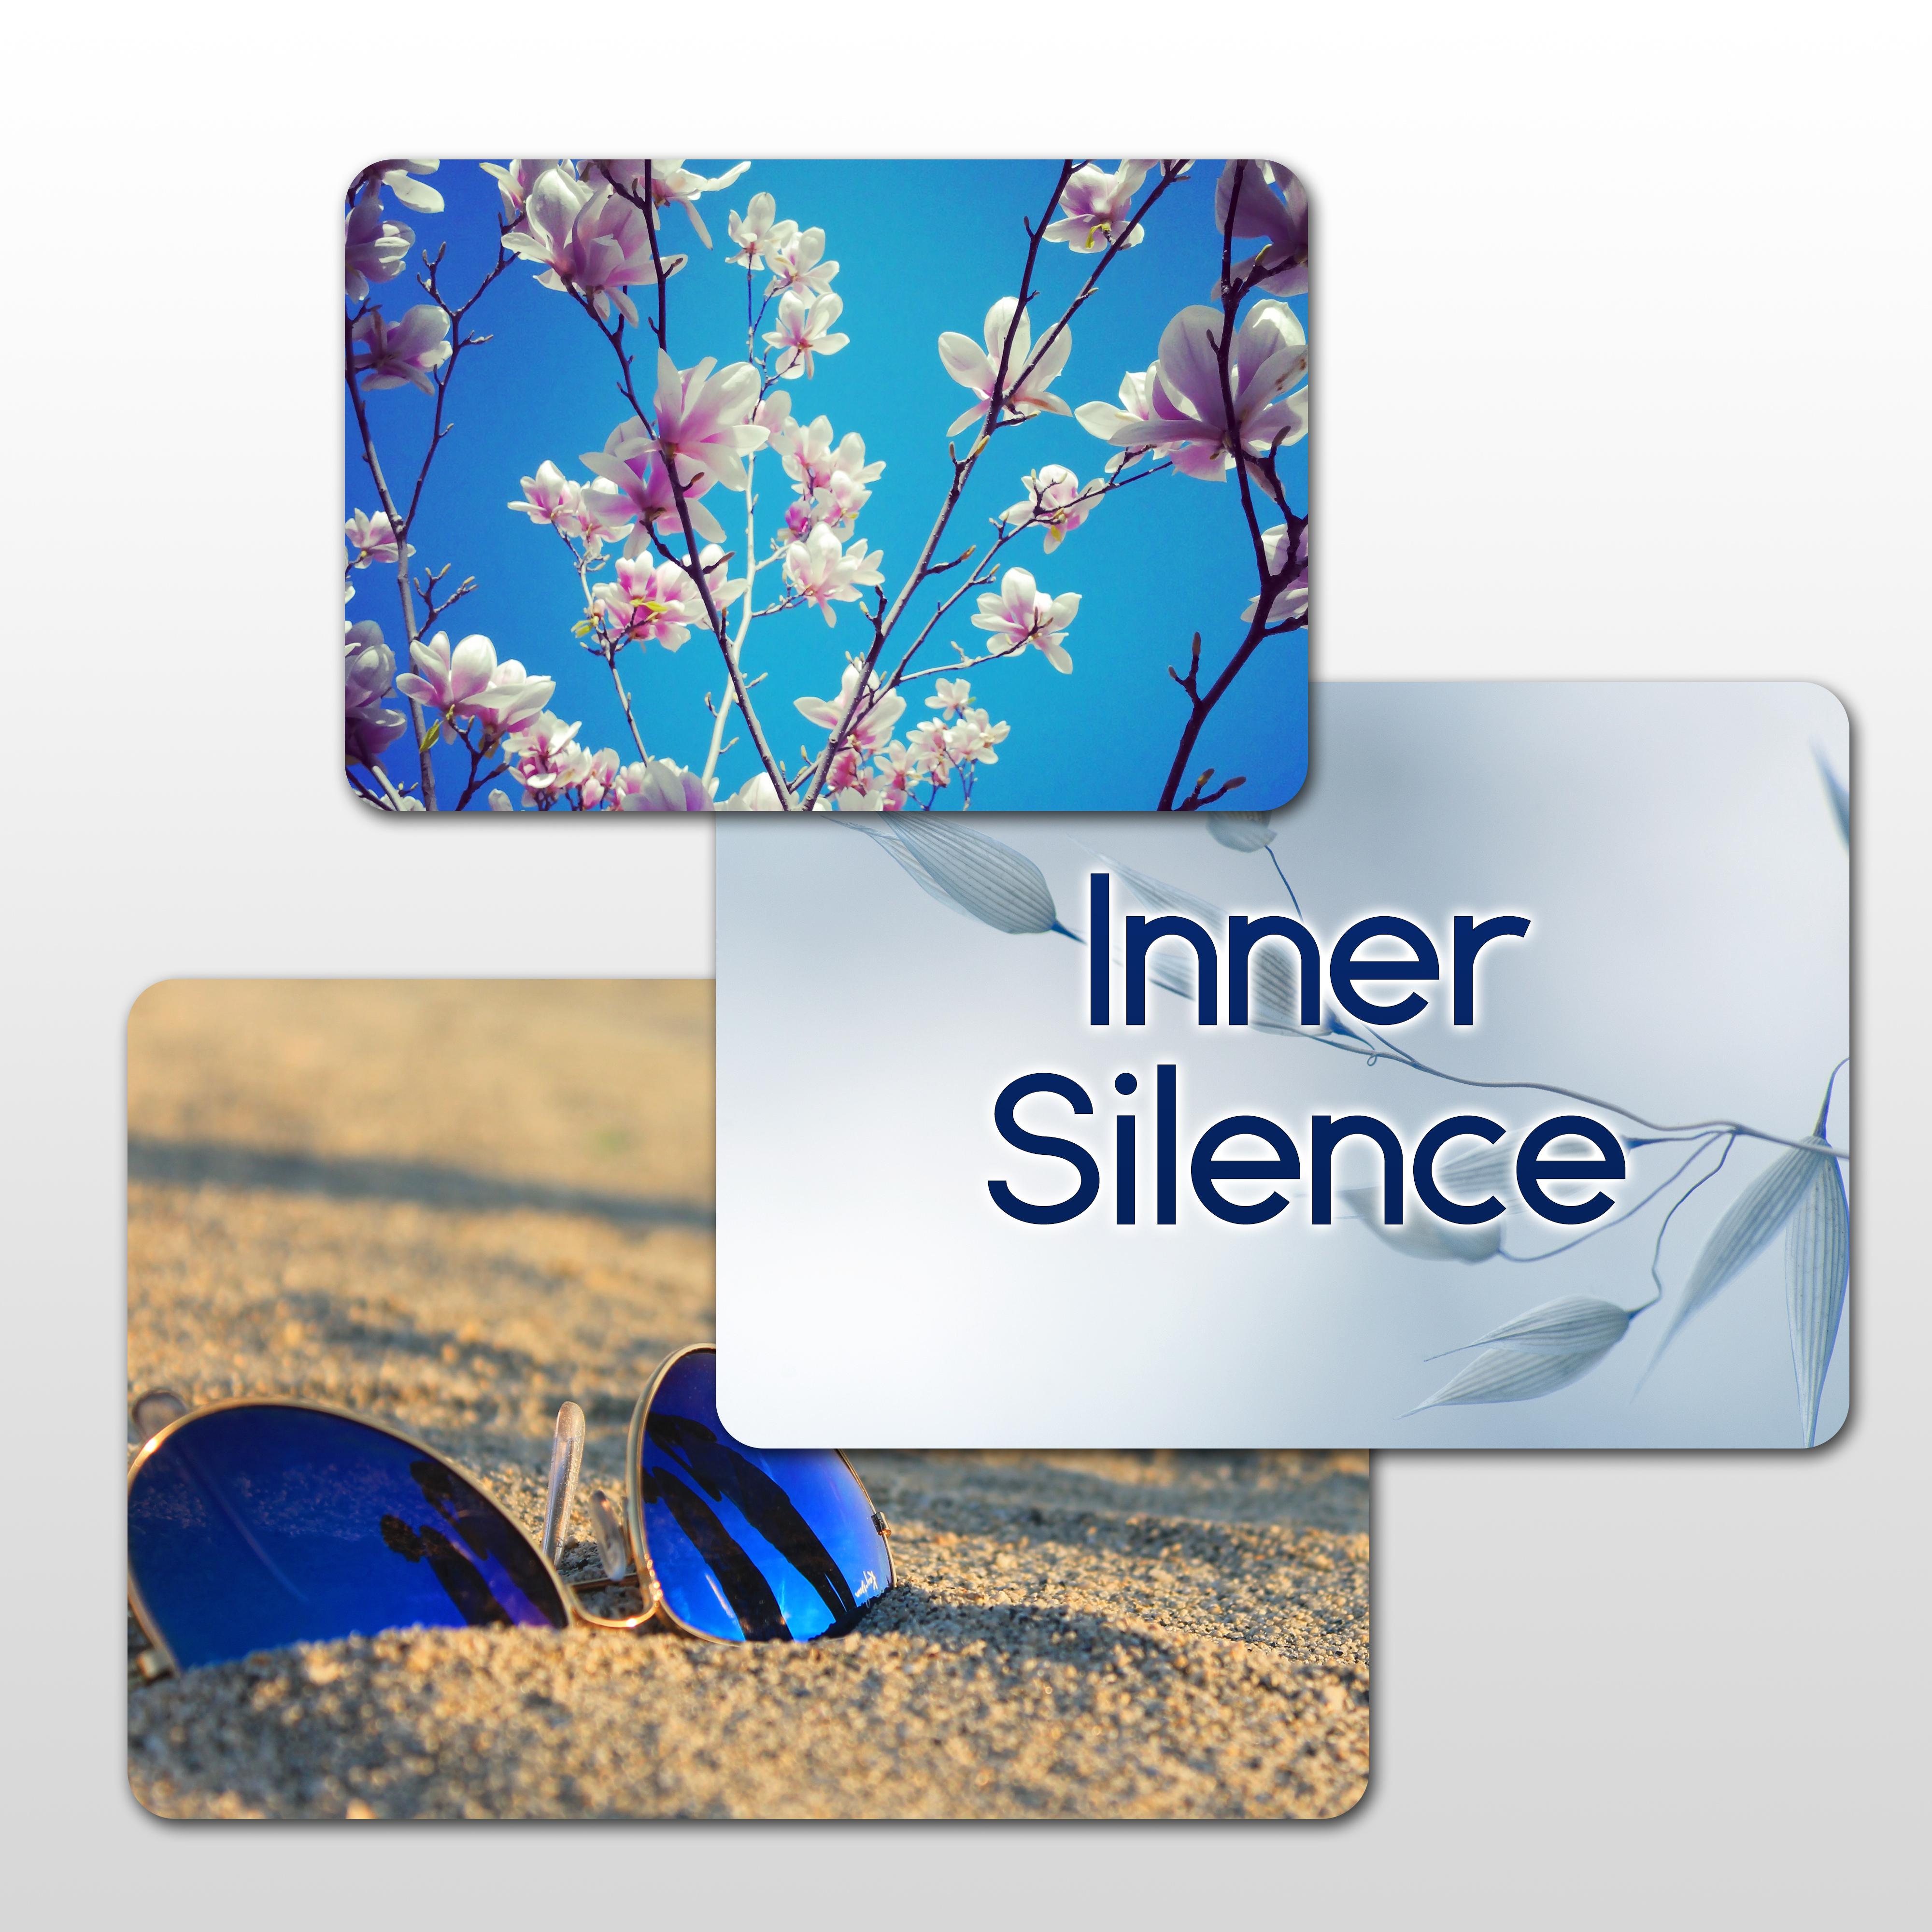 Inner Silence - The Best Music for Restful Sleep, Relaxing Background Music, Sweet Dreams, Soothing Sounds, Beautiful Piano, Stress Relief, Calmness